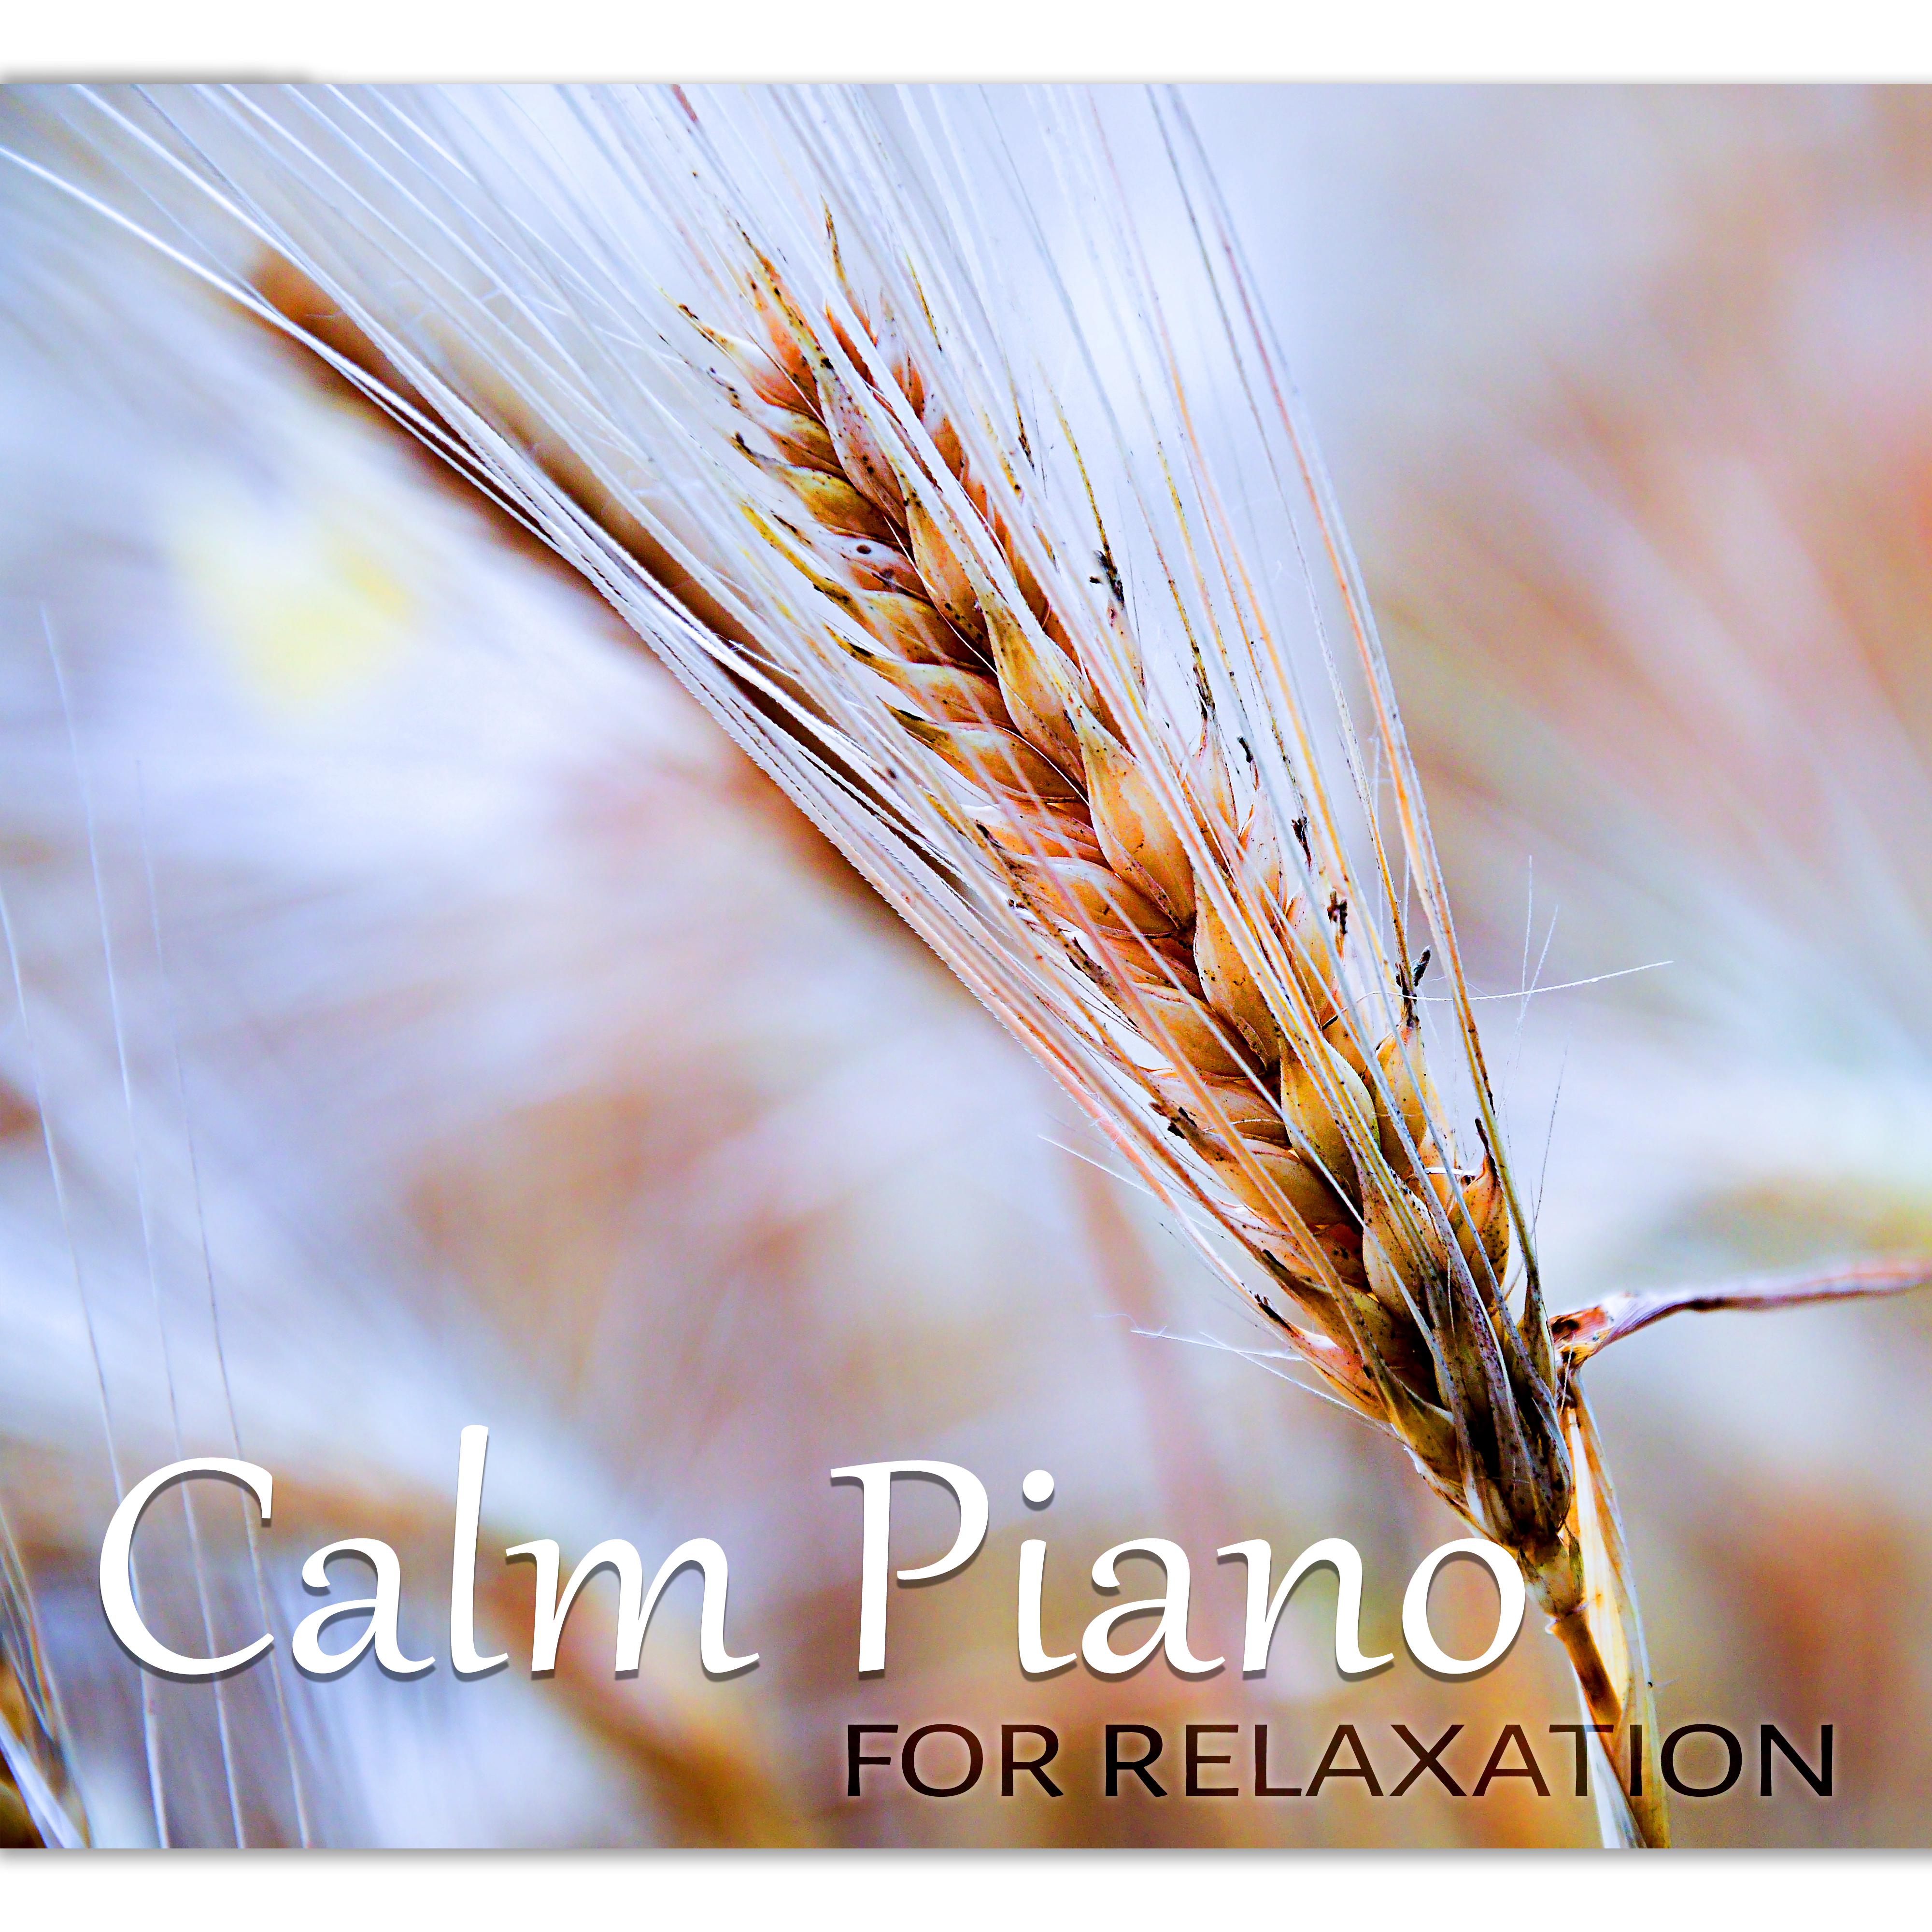 Calm Piano for Relaxation - Background Music for Dinner, Study, Sleep and Chill Lounge, Easy Listening Instrumentals, Reduce Stress, Just Relax